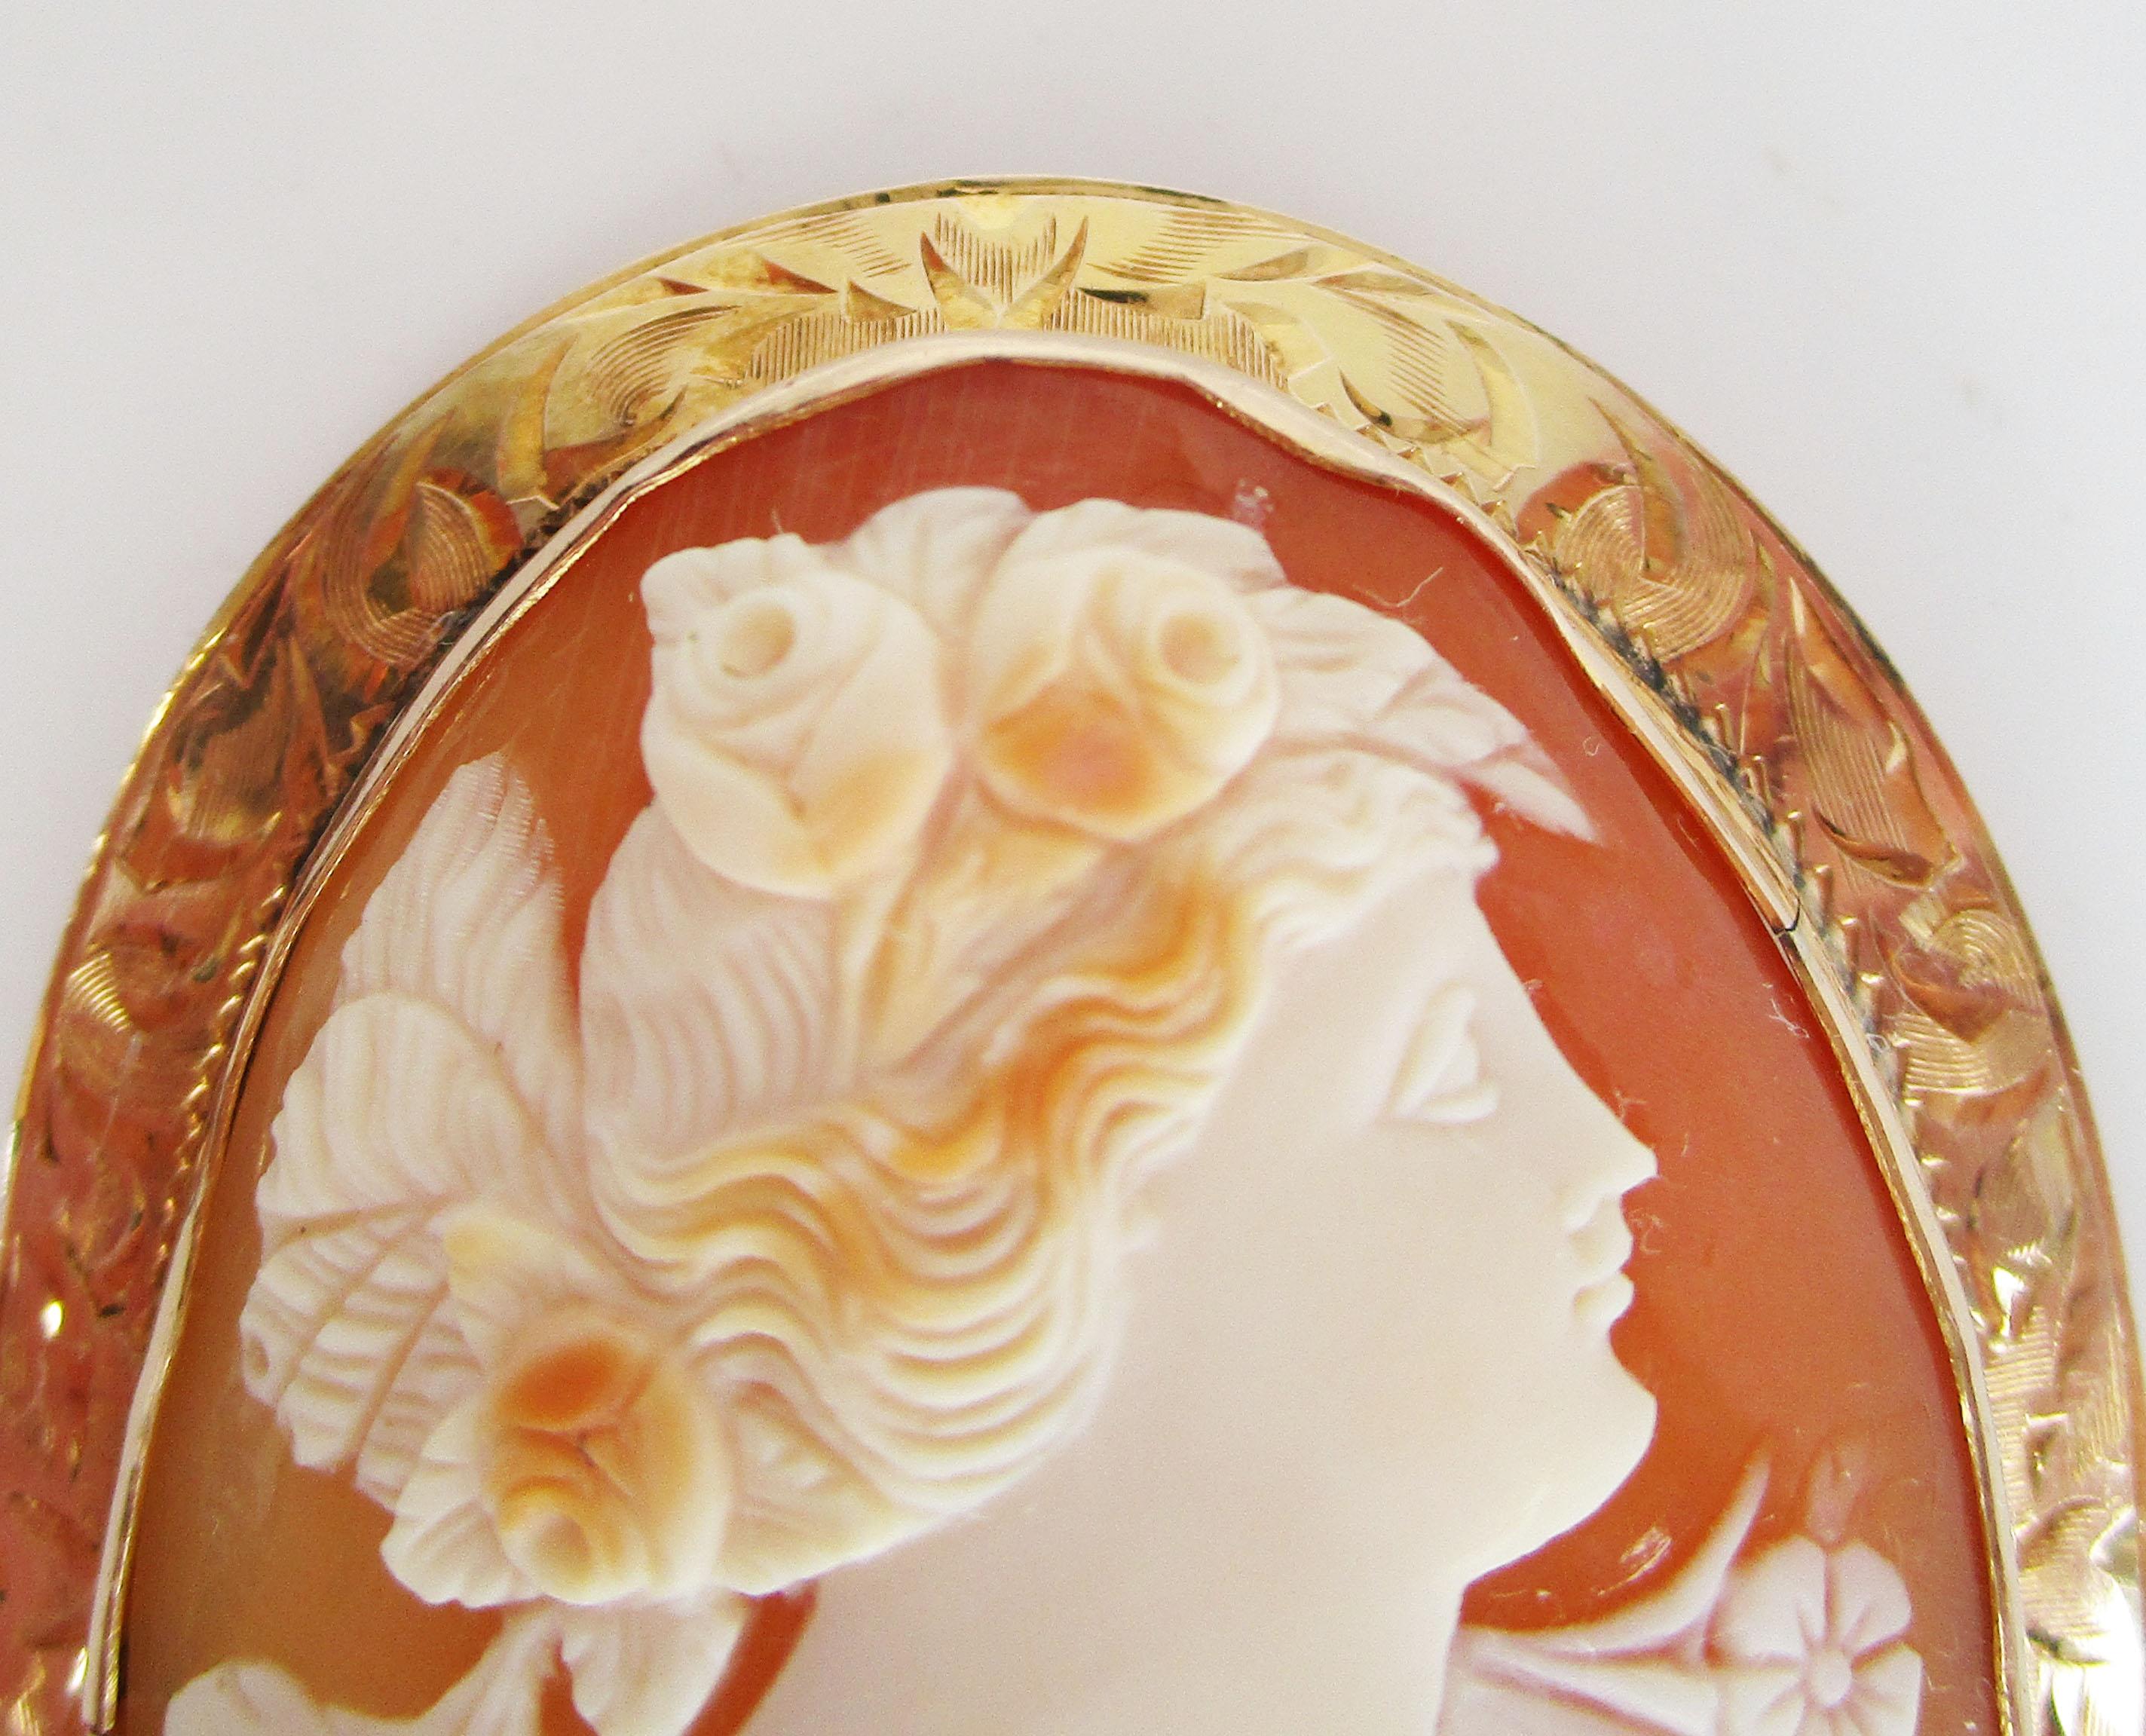 This is a breathtaking original Victorian hand-carved 3 color shell cameo in 10k yellow gold. The 10k yellow gold frame is decorated with beautiful engraving in a design that has a subtle floral look. The brightness of the yellow gold serves as the